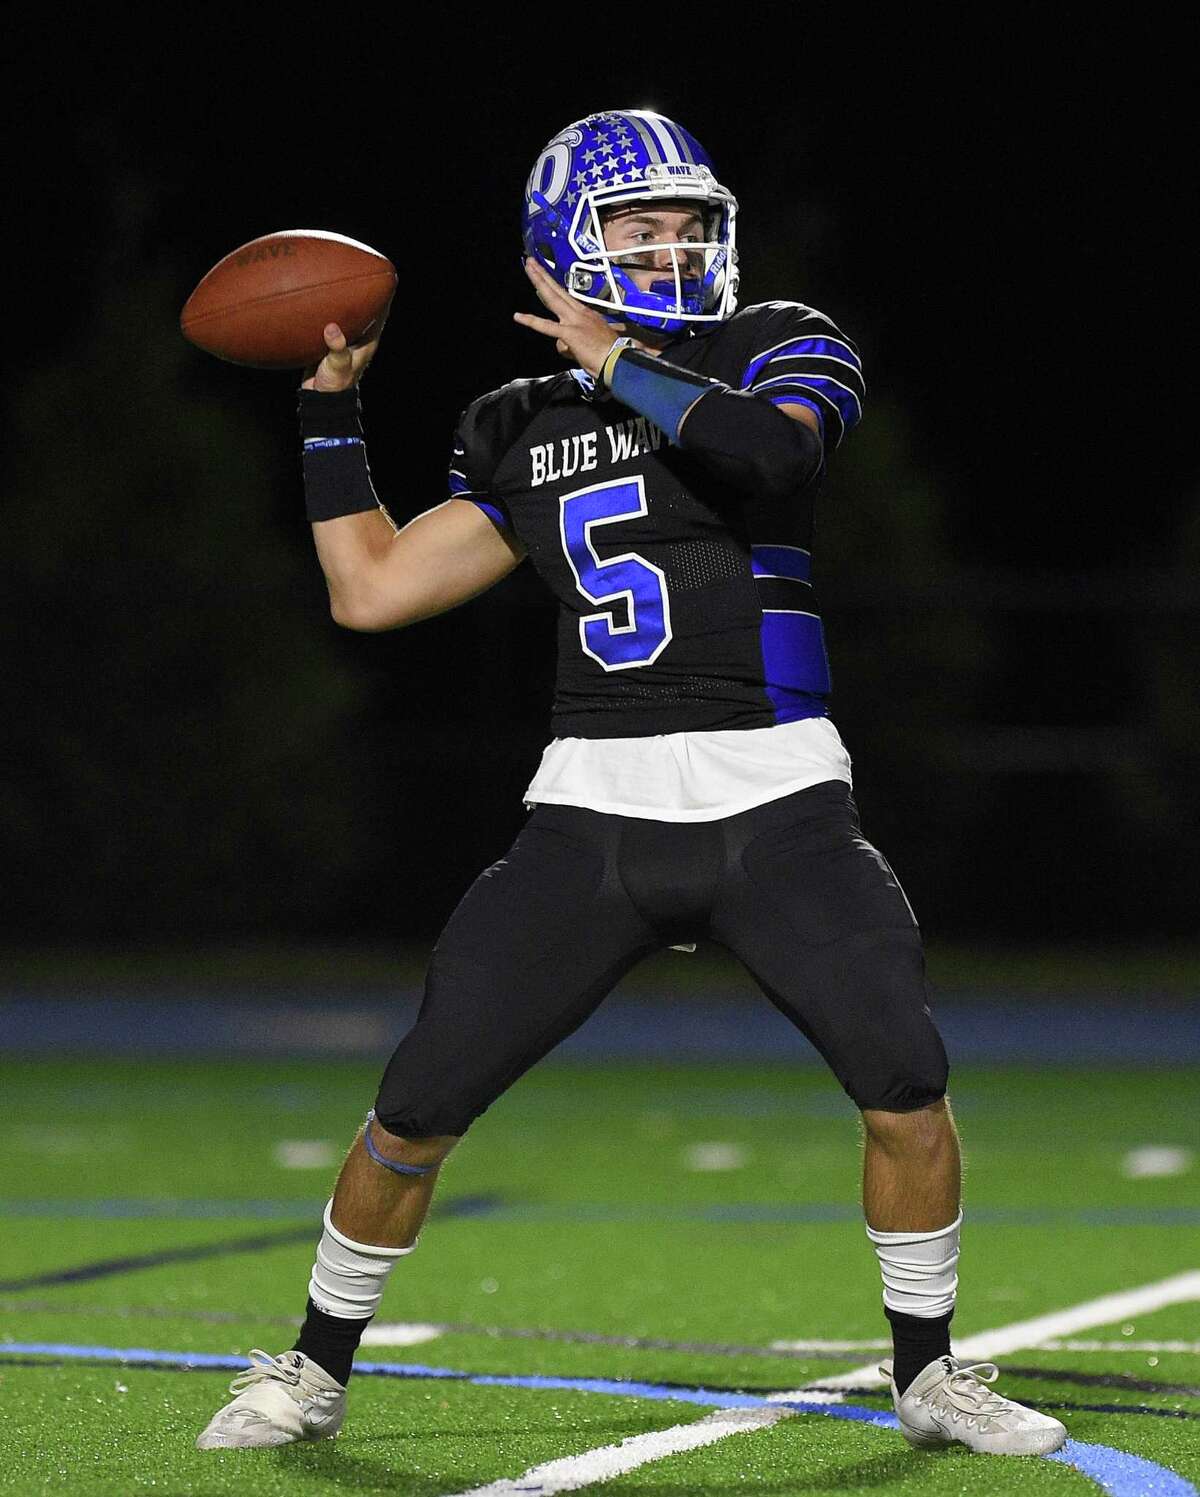 Darien quarterback Jack Joyce ran for two touchdowns in his team’s semifinal-round win against West Haven in the Class LL semifinals.